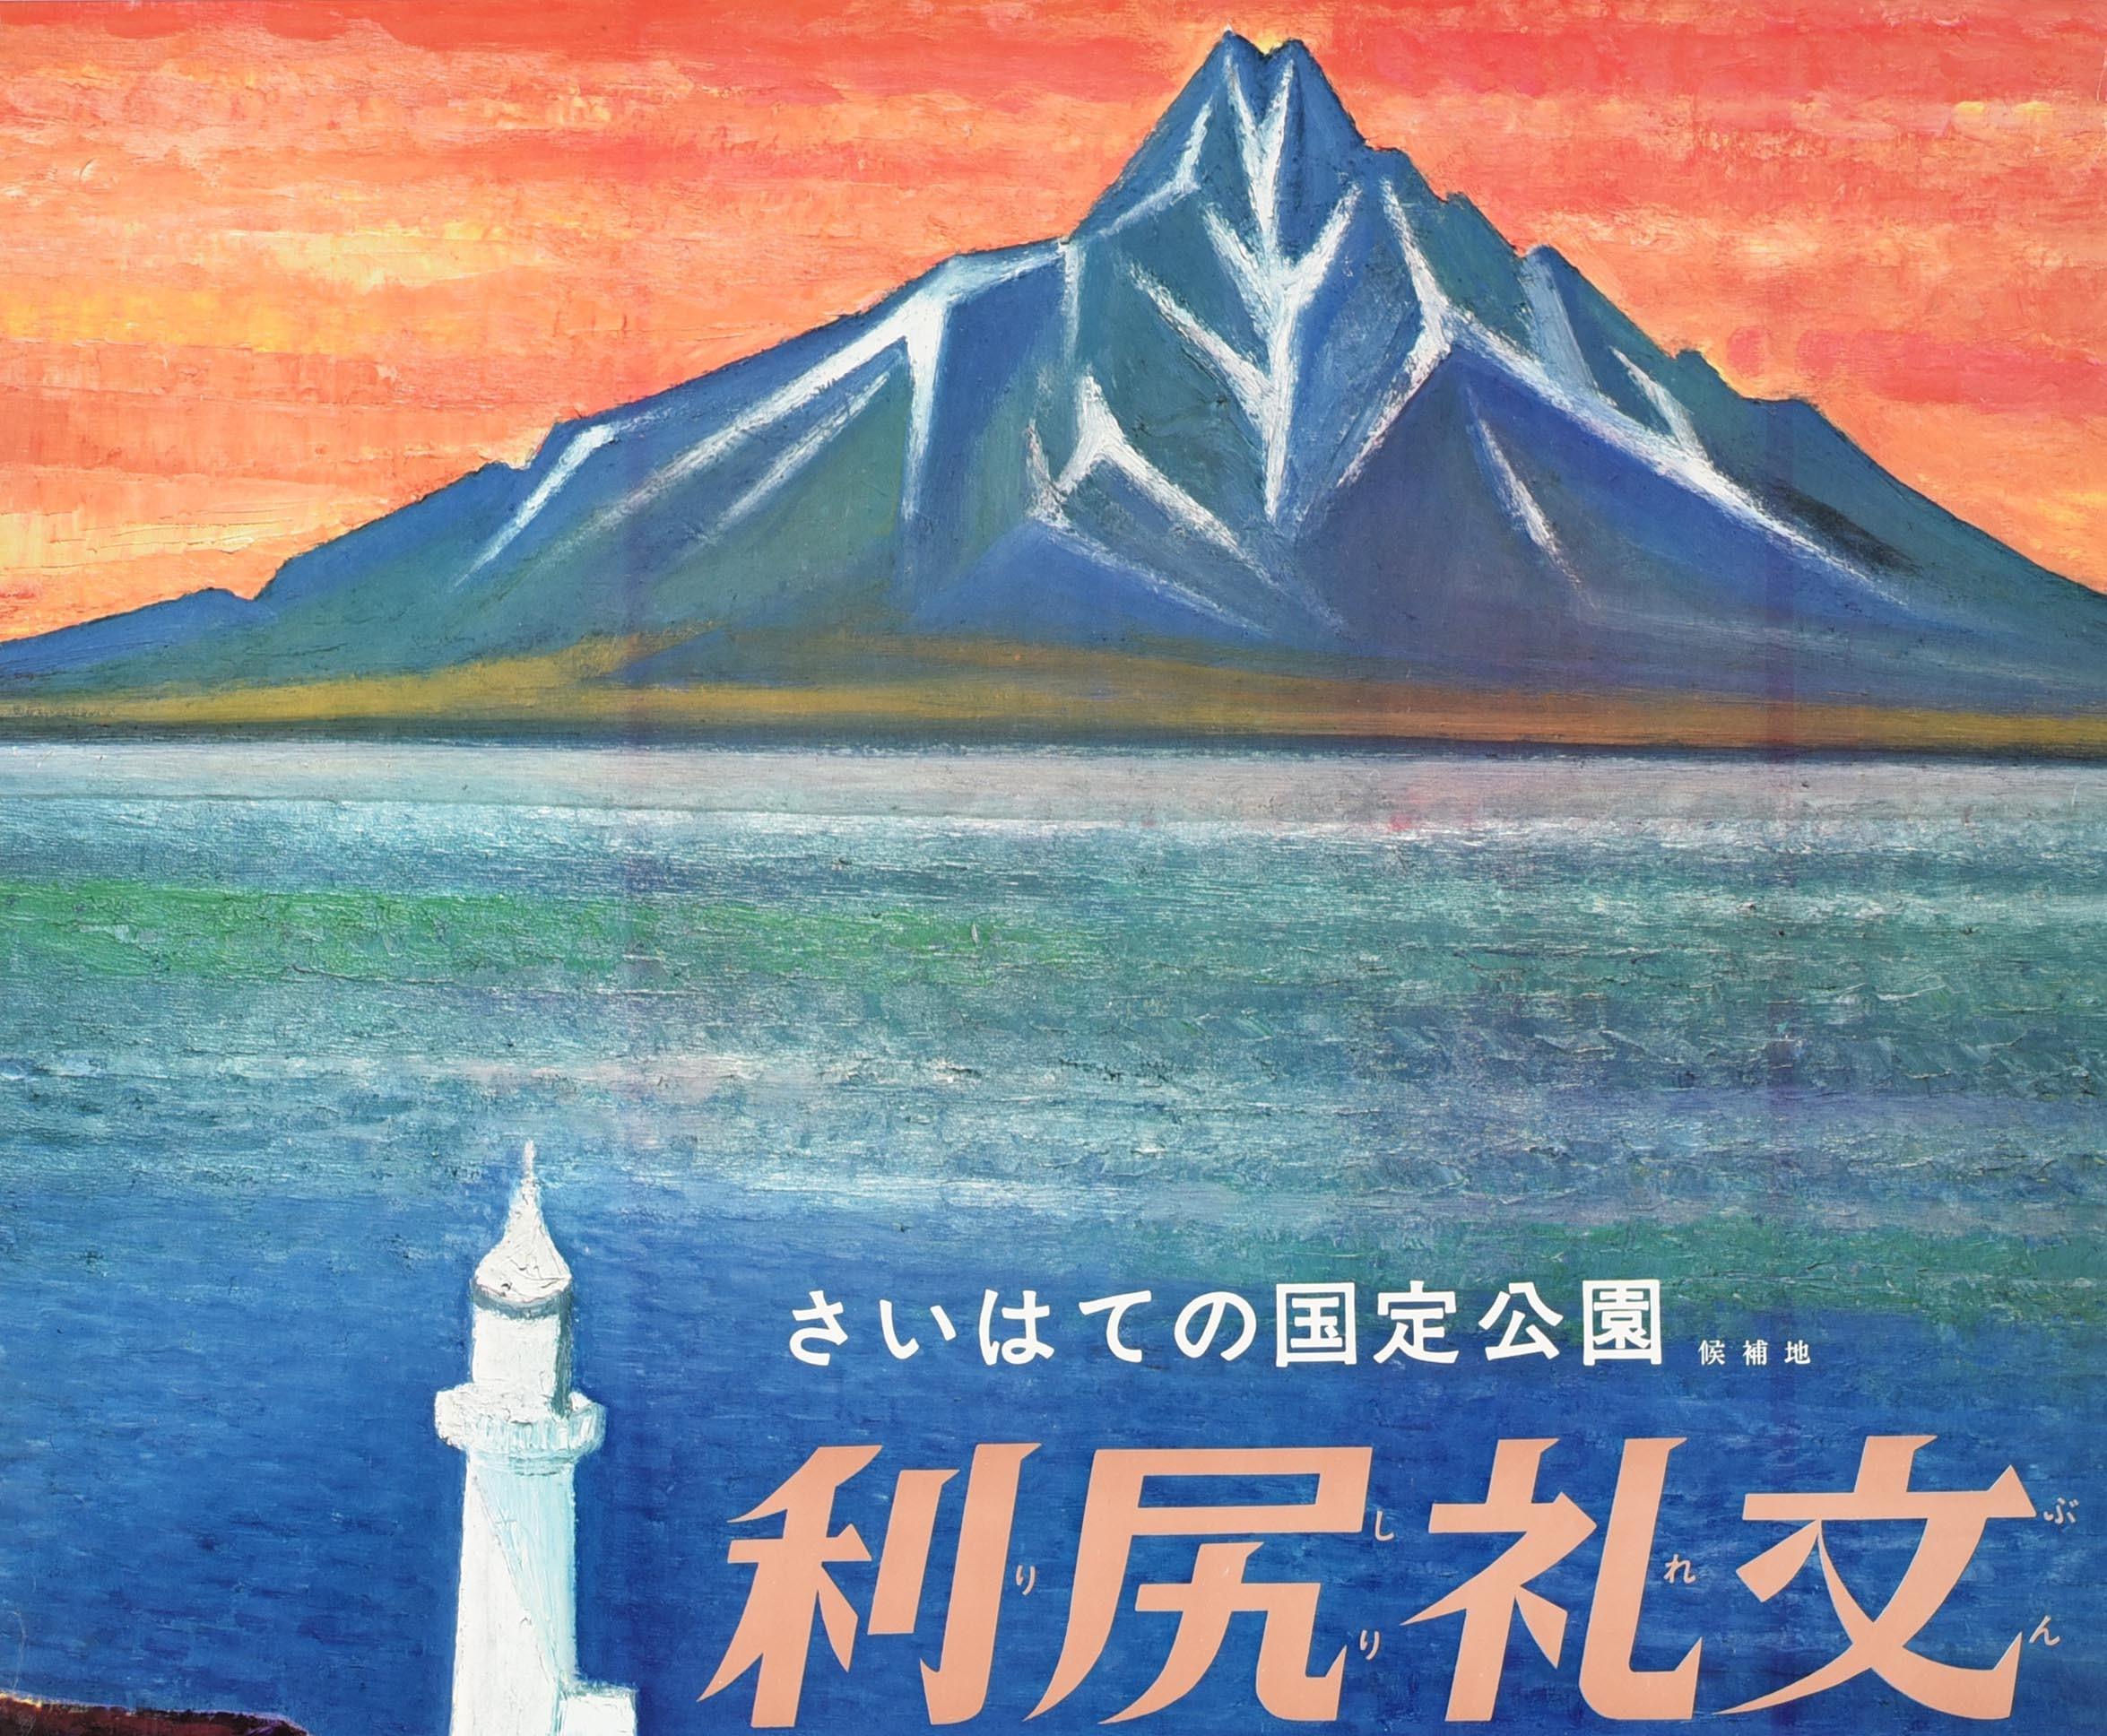 Original vintage travel poster for Rishiri Island in Japan featuring a colourful scenic view of the volcanic Mount Rishiri (aka Rishiri Fuji due to its similarity to Mount Fuji) across the green, blue and white fishing waters of the Sea of Japan, a